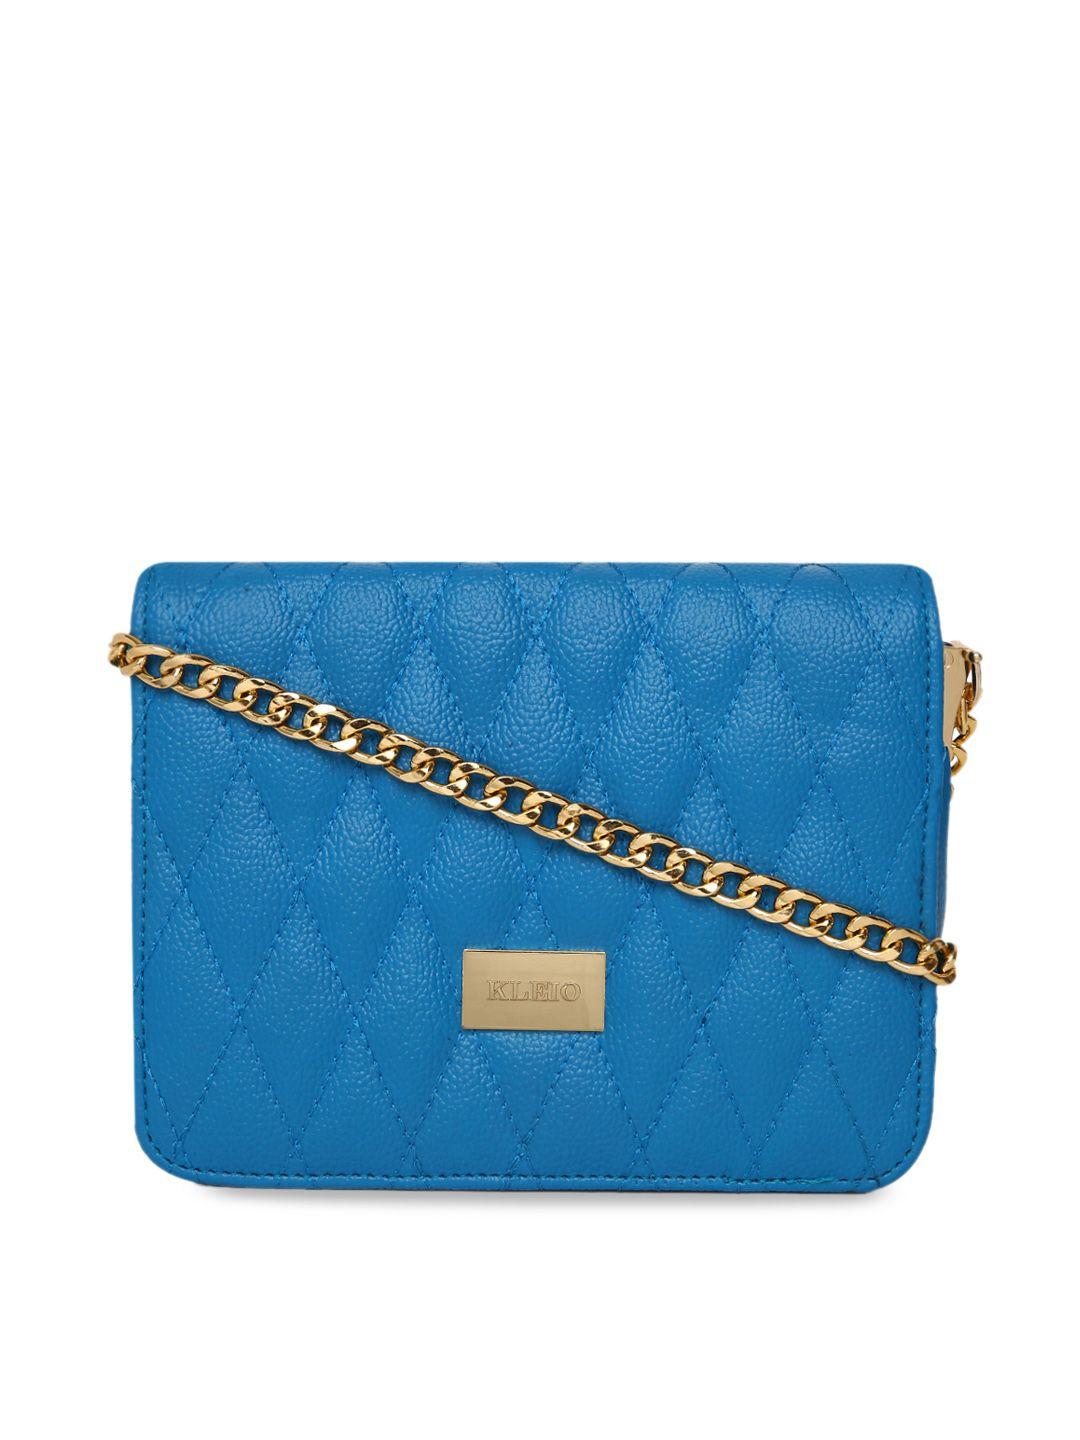 kleio turquoise blue quilted structured sling party bag